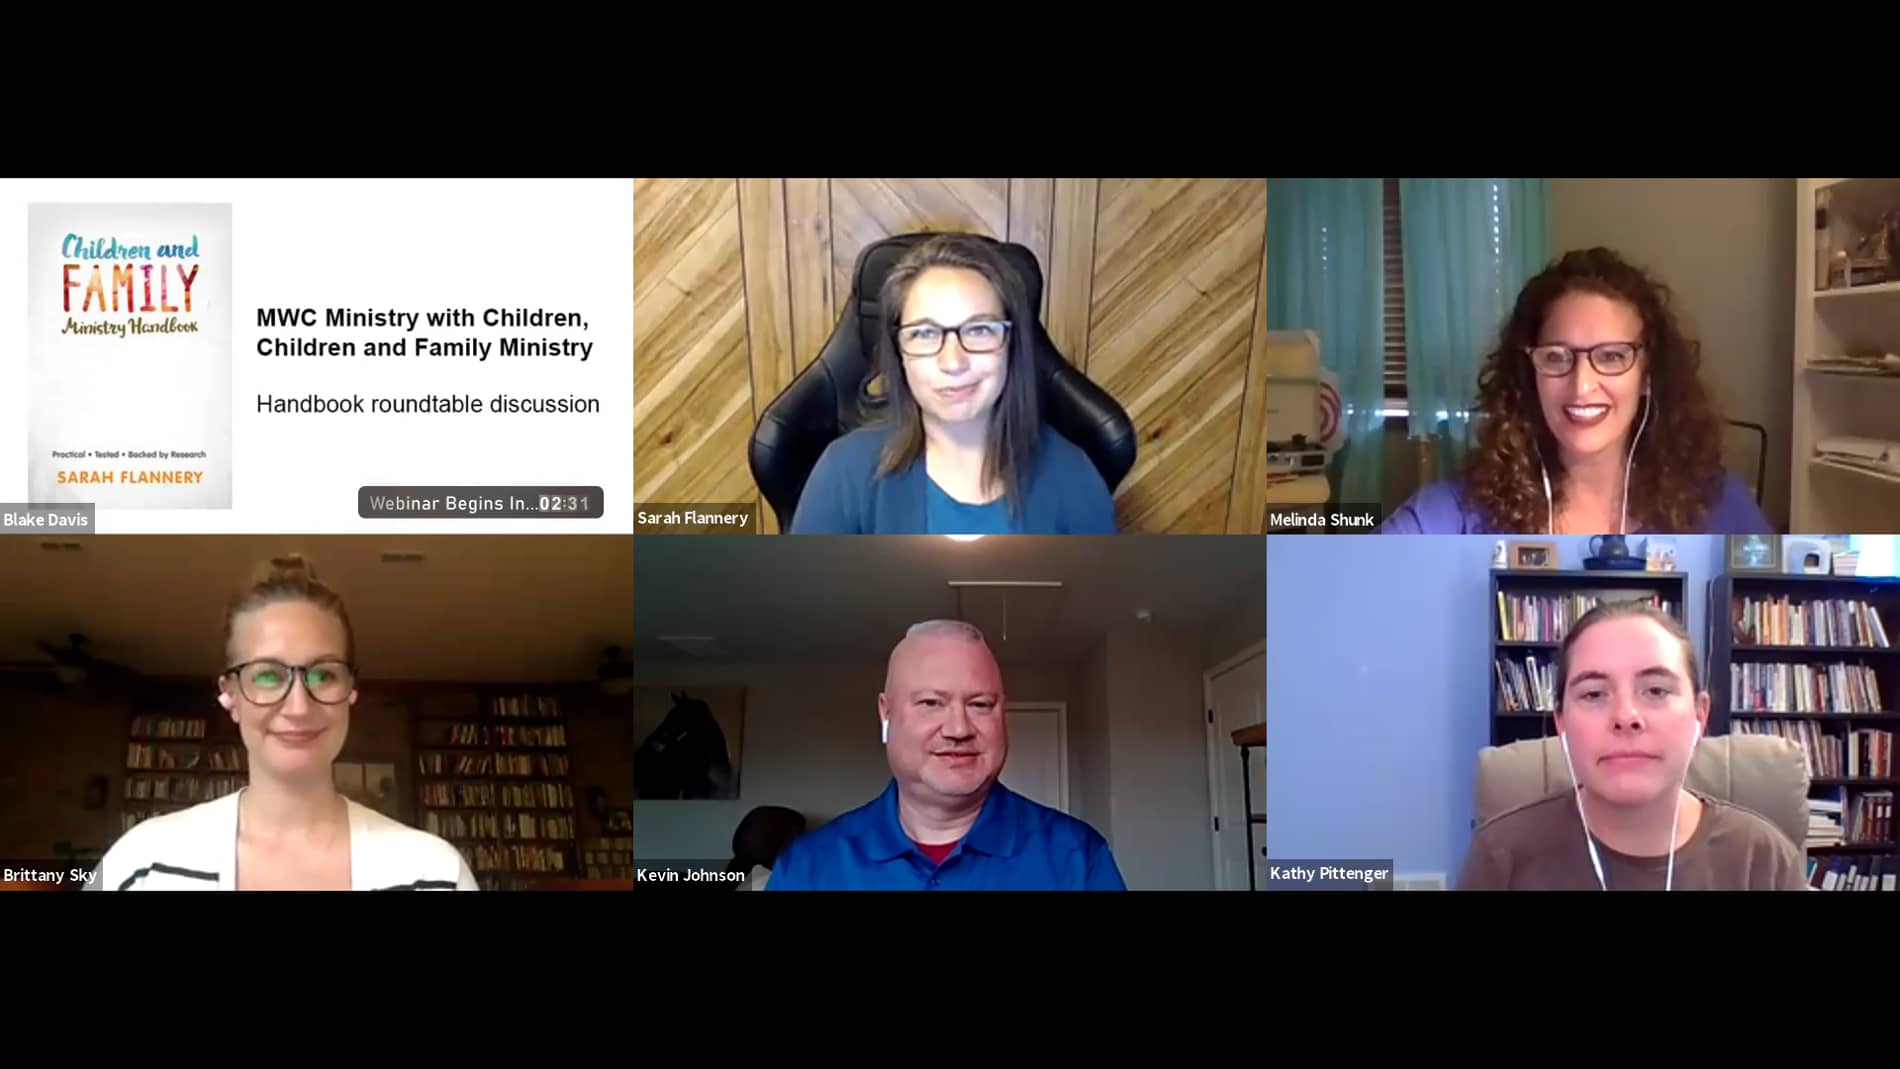 Ministry with Children: Children and Family Ministry Handbook Roundtable Discussion (from Discipleship Ministries)